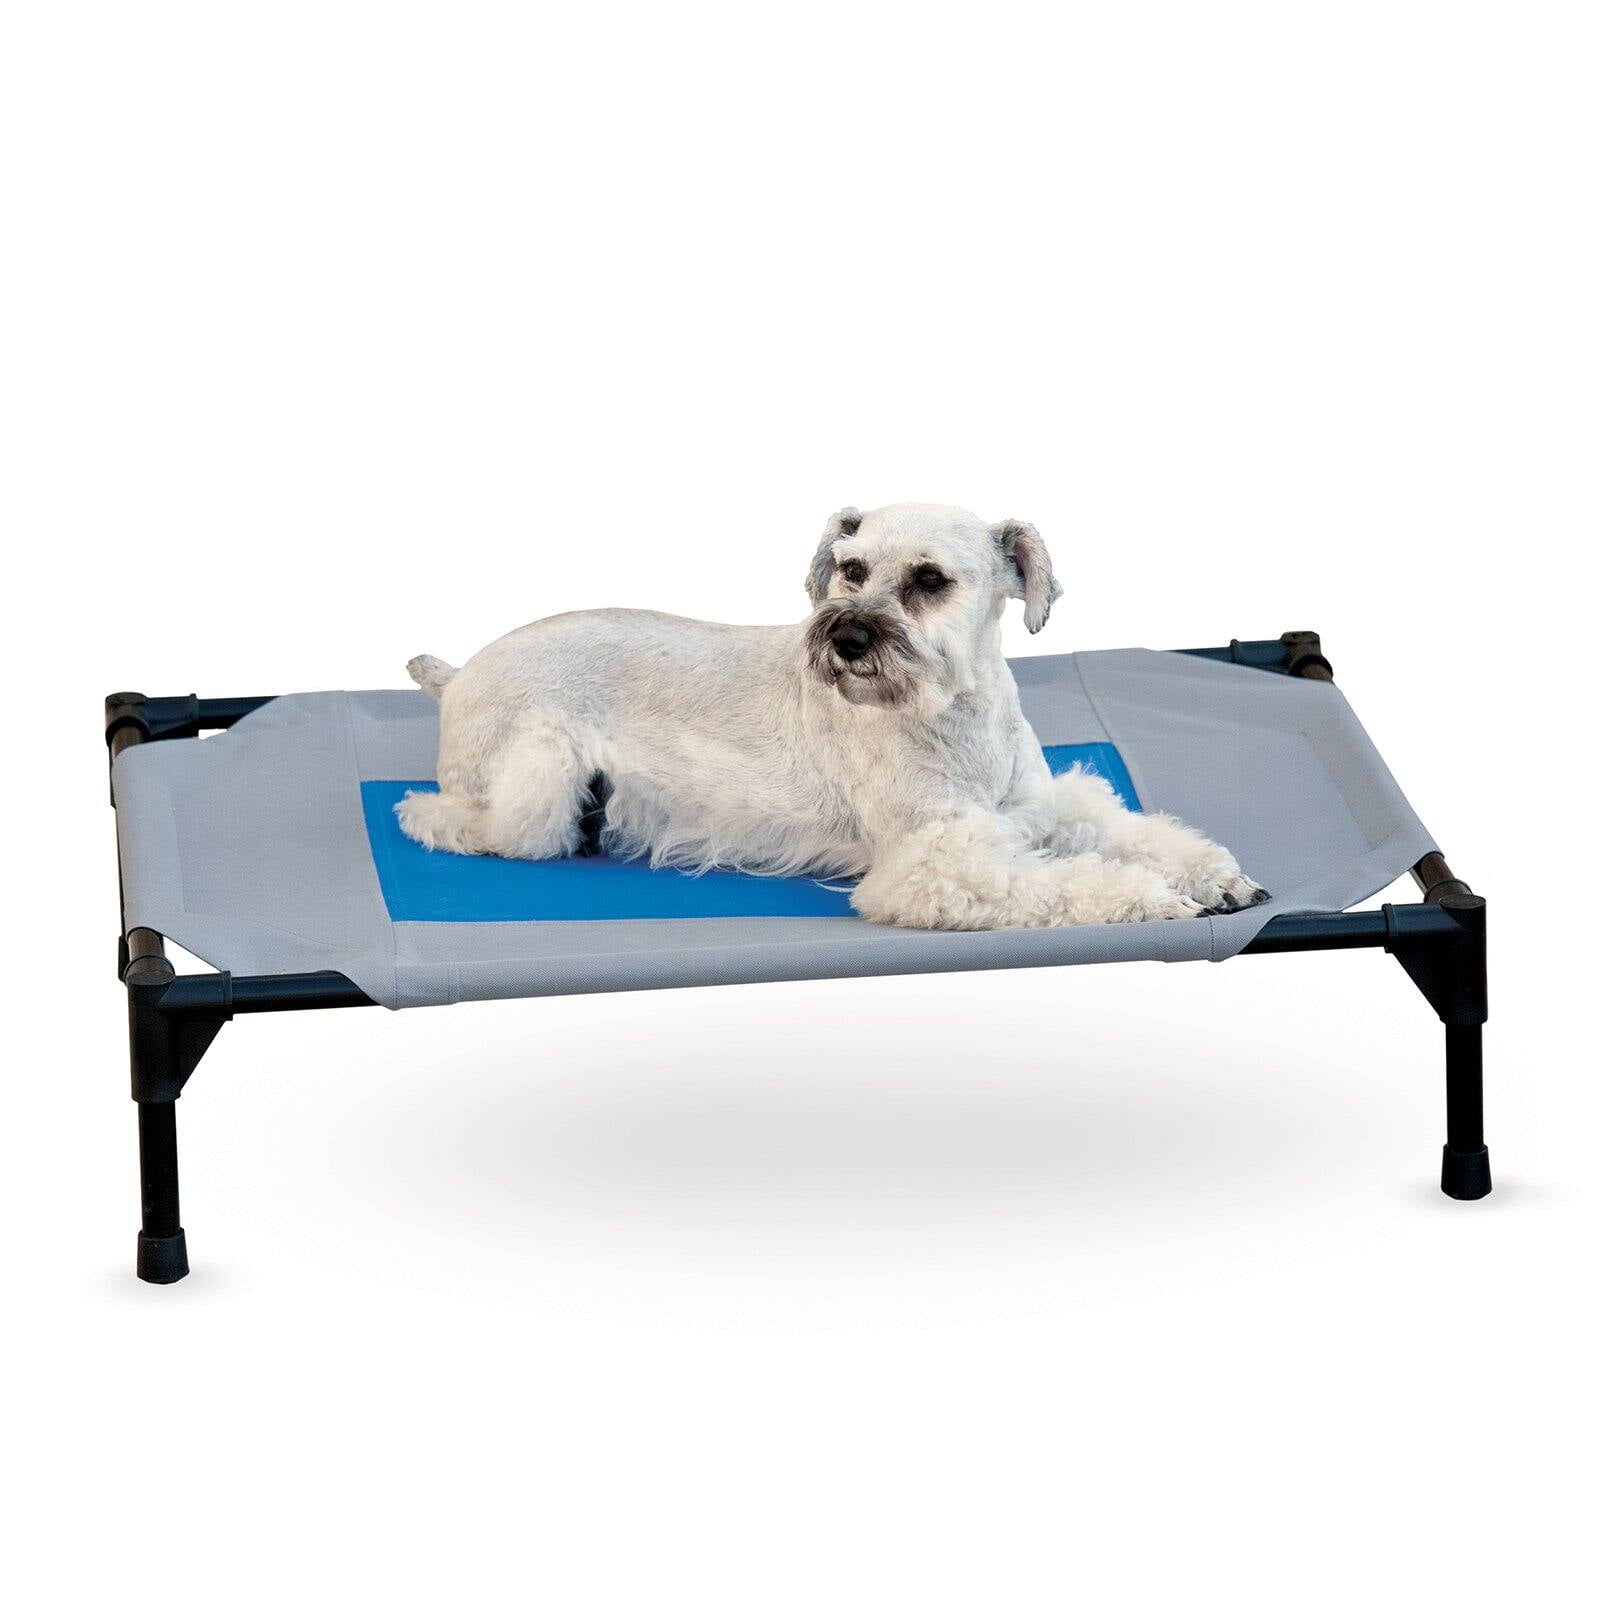 K&H Pet Products Pet Cot Small Chocolate 17" x 22" x 7" KH1605 